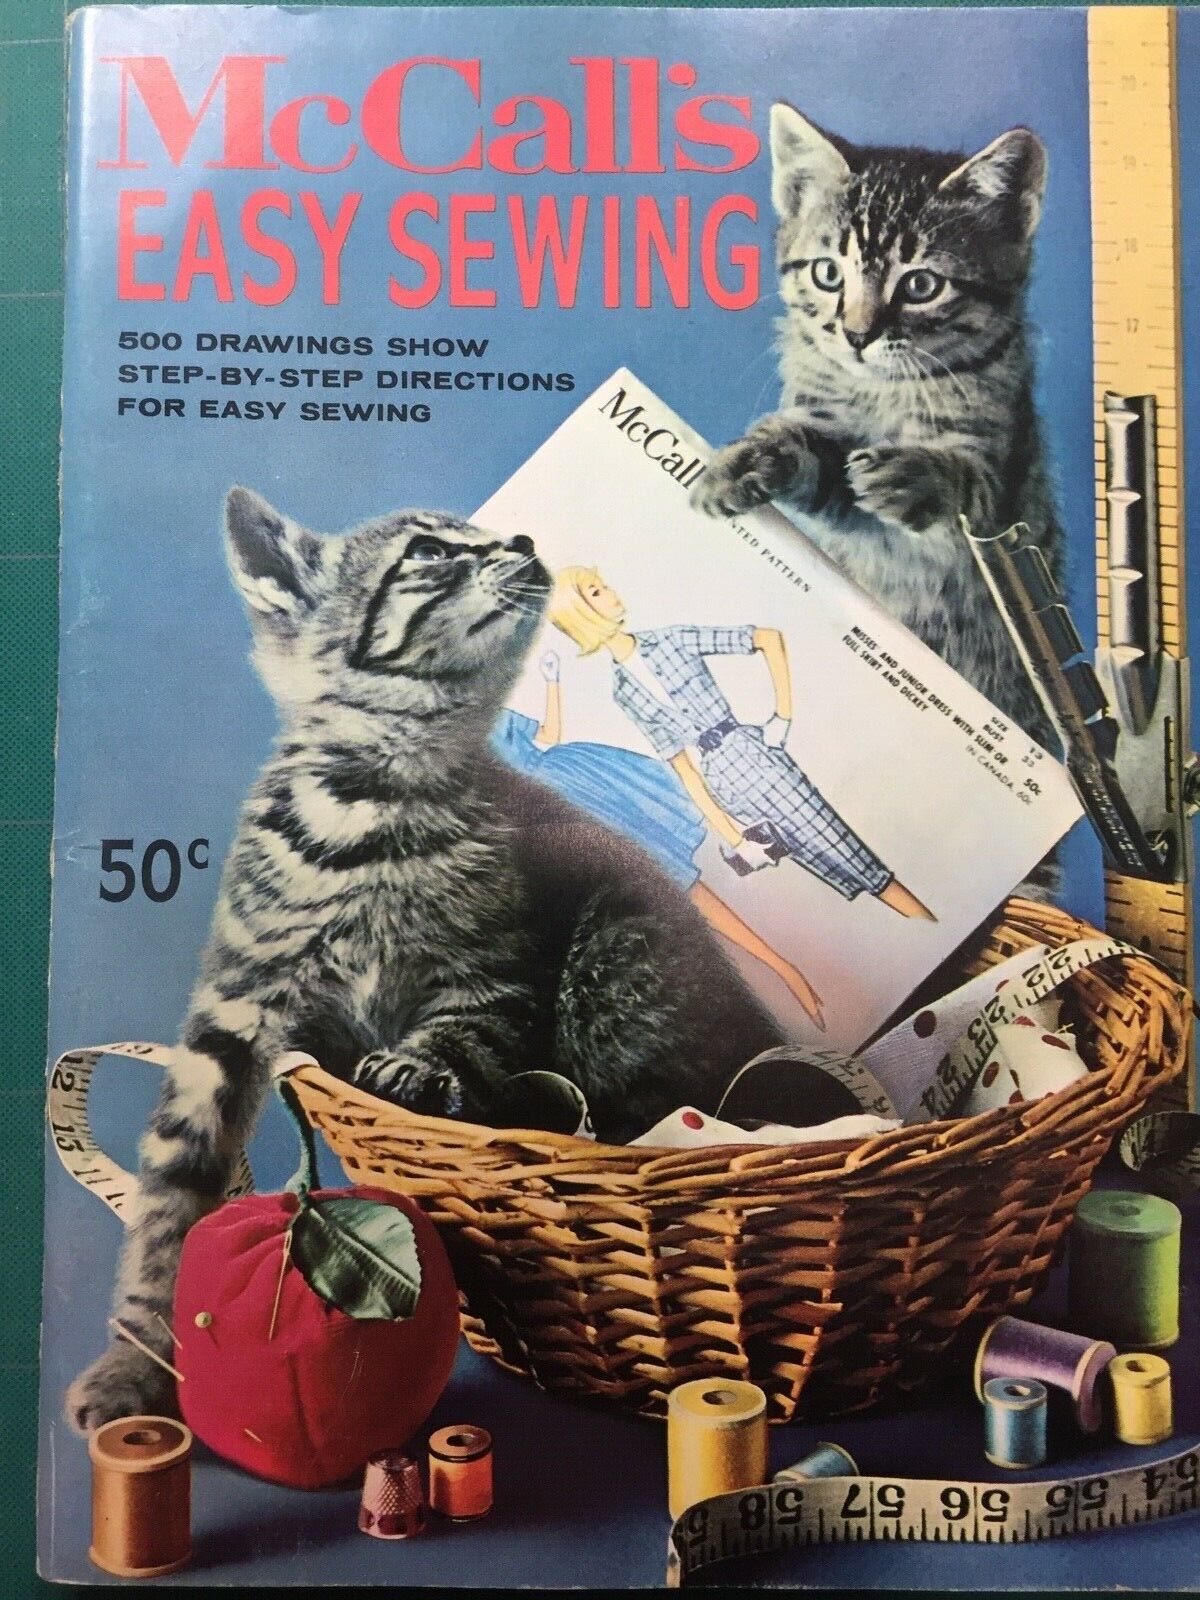 1961 McCalls EASY SEWING Manual Easy Sewing Tailoring Guide Manual 112 pgs